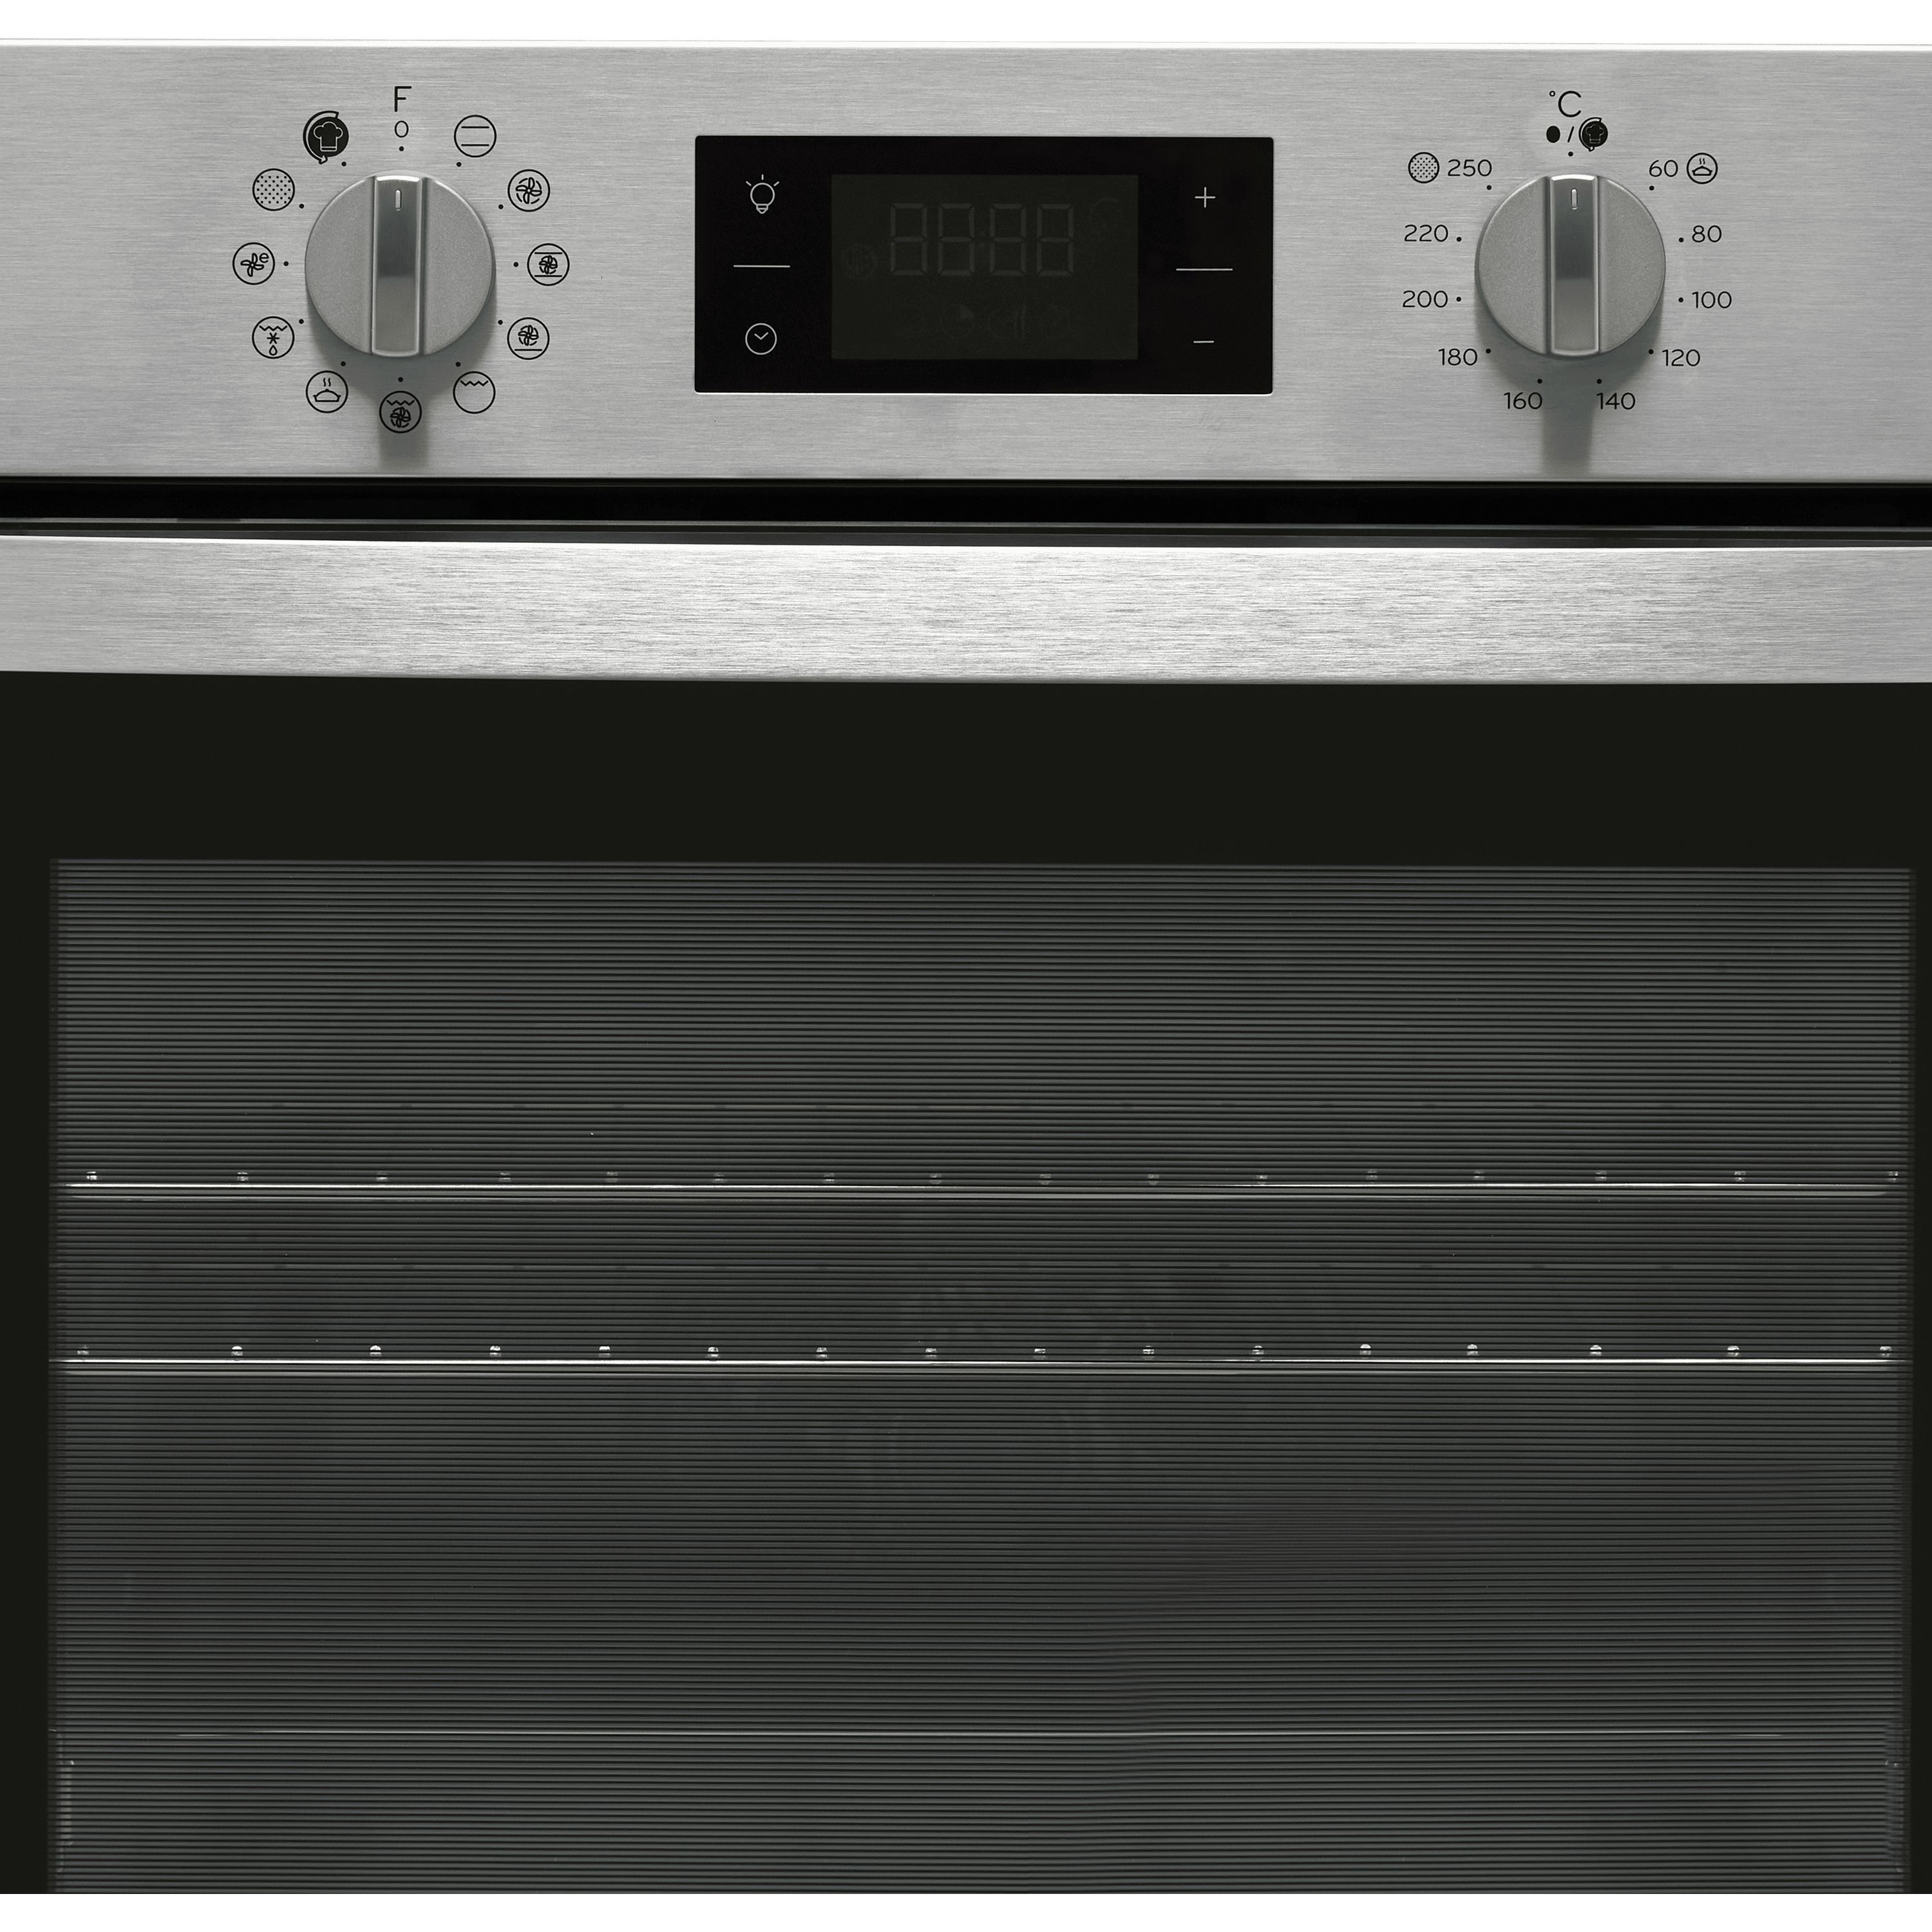 Indesit IFW3841PIXUK_SS Integrated Single electric multifunction Oven - Stainless steel effect